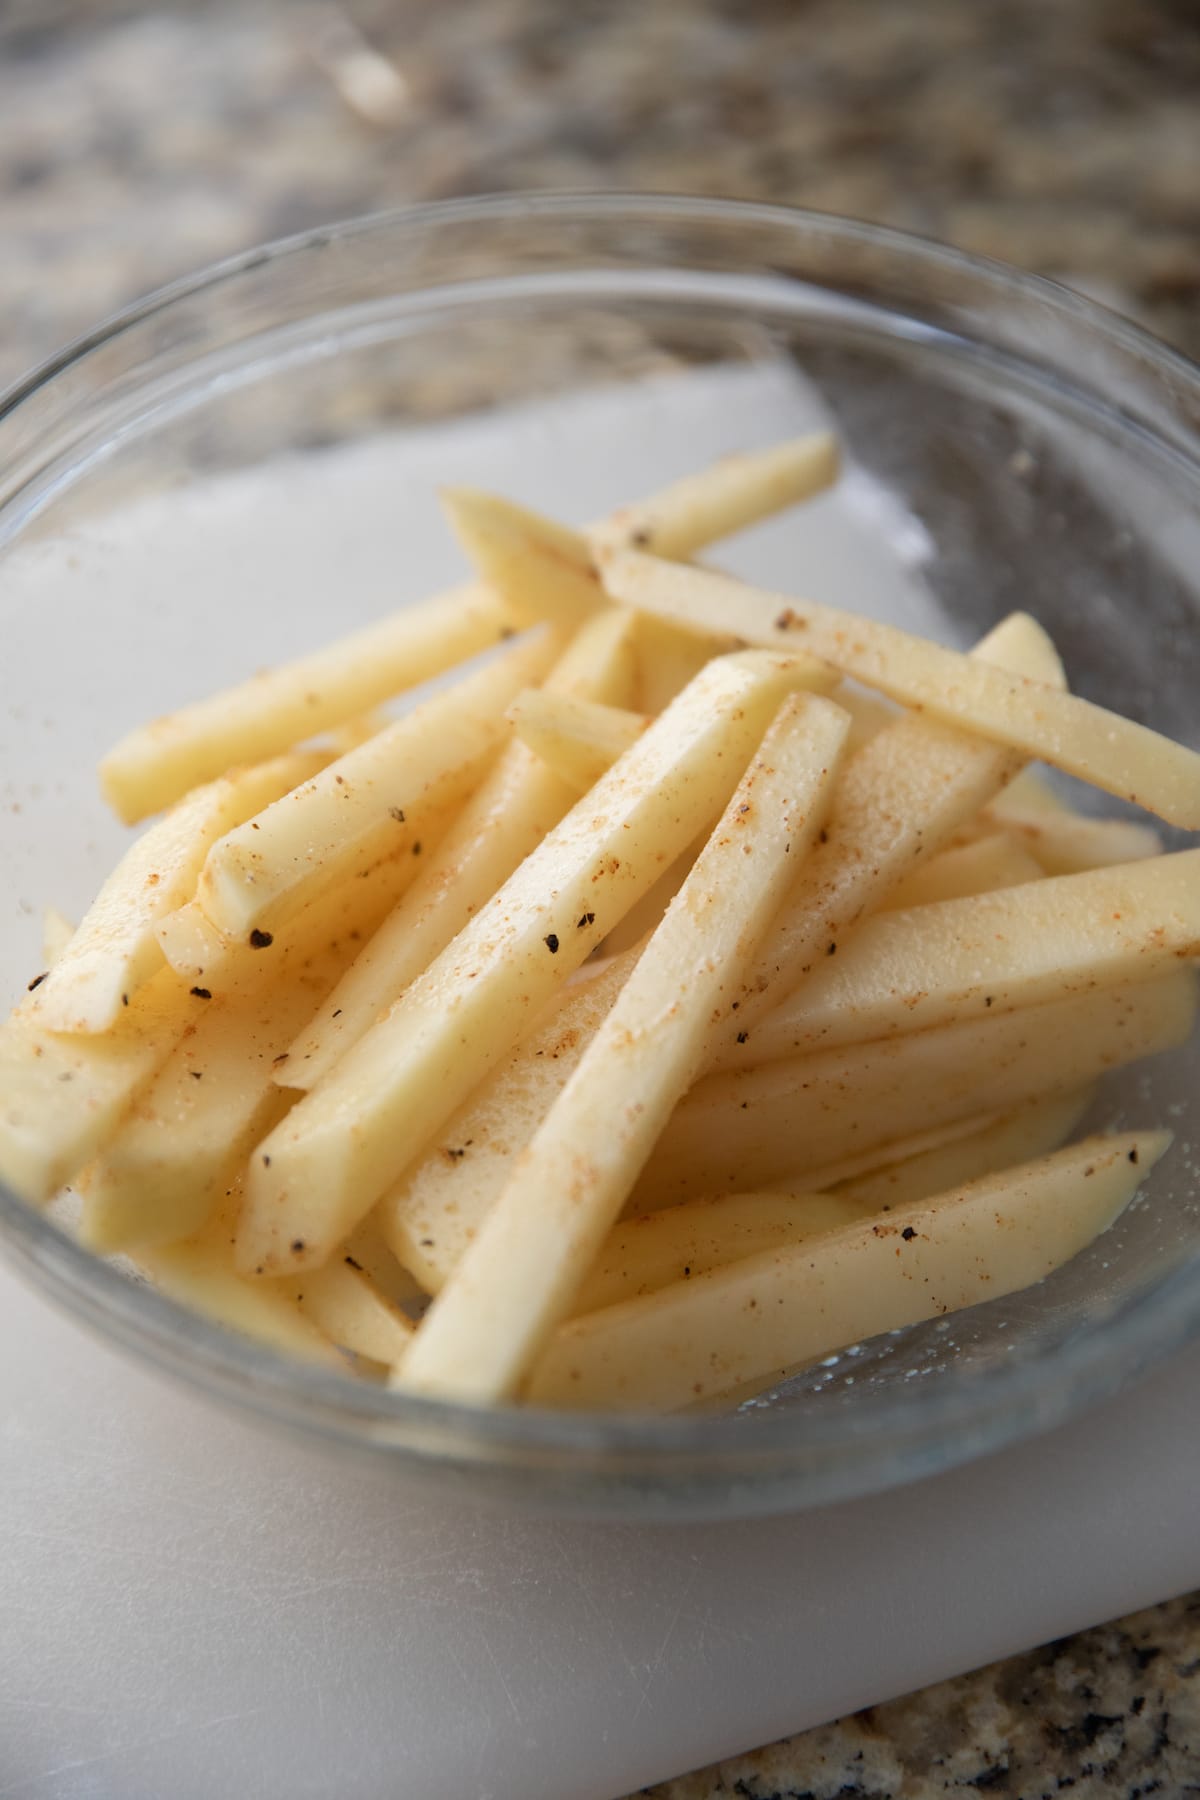 unbaked fries in bowl